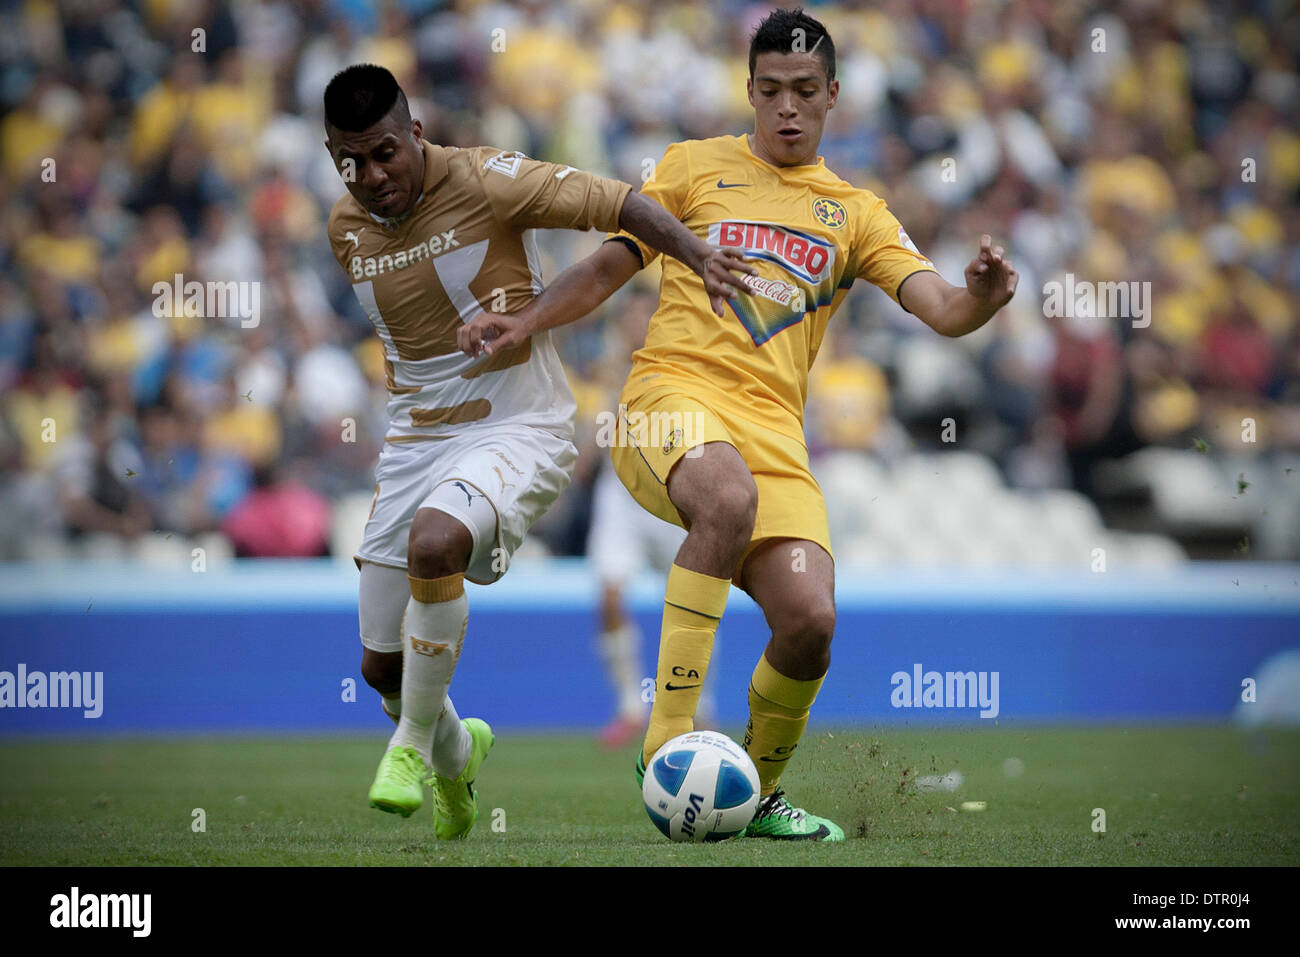 Mexico City, Mexico. 22nd Feb, 2014. Raul Jimenez (R) of America vies for  the ball with Daniel Luduena of Pumas' UNAM during their match of the MX  League Closing Tournament at Azteca